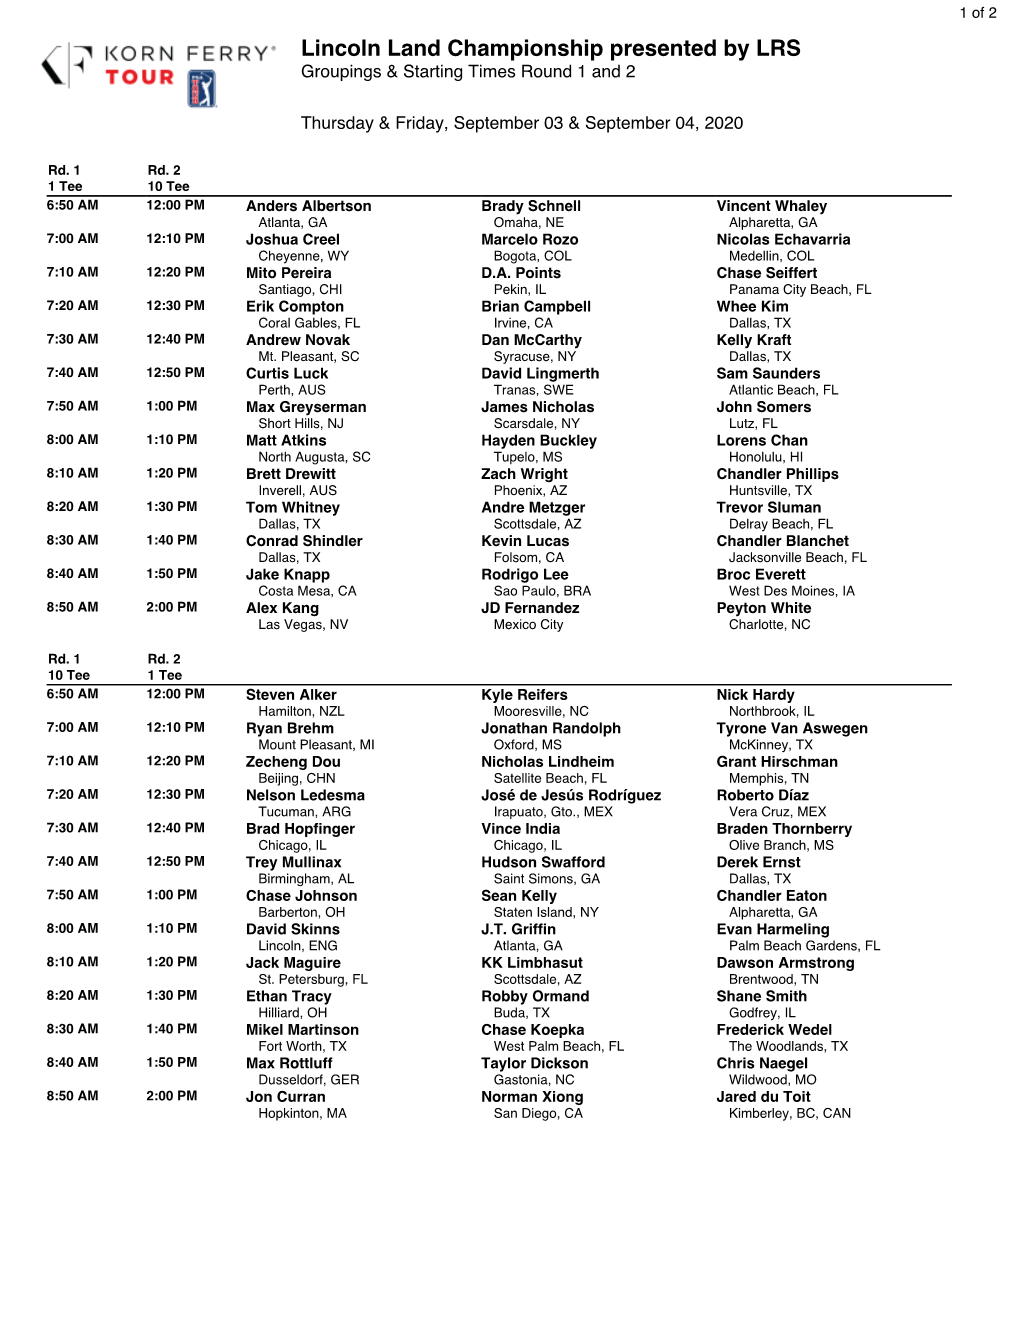 Lincoln Land Championship Presented by LRS Groupings & Starting Times Round 1 and 2